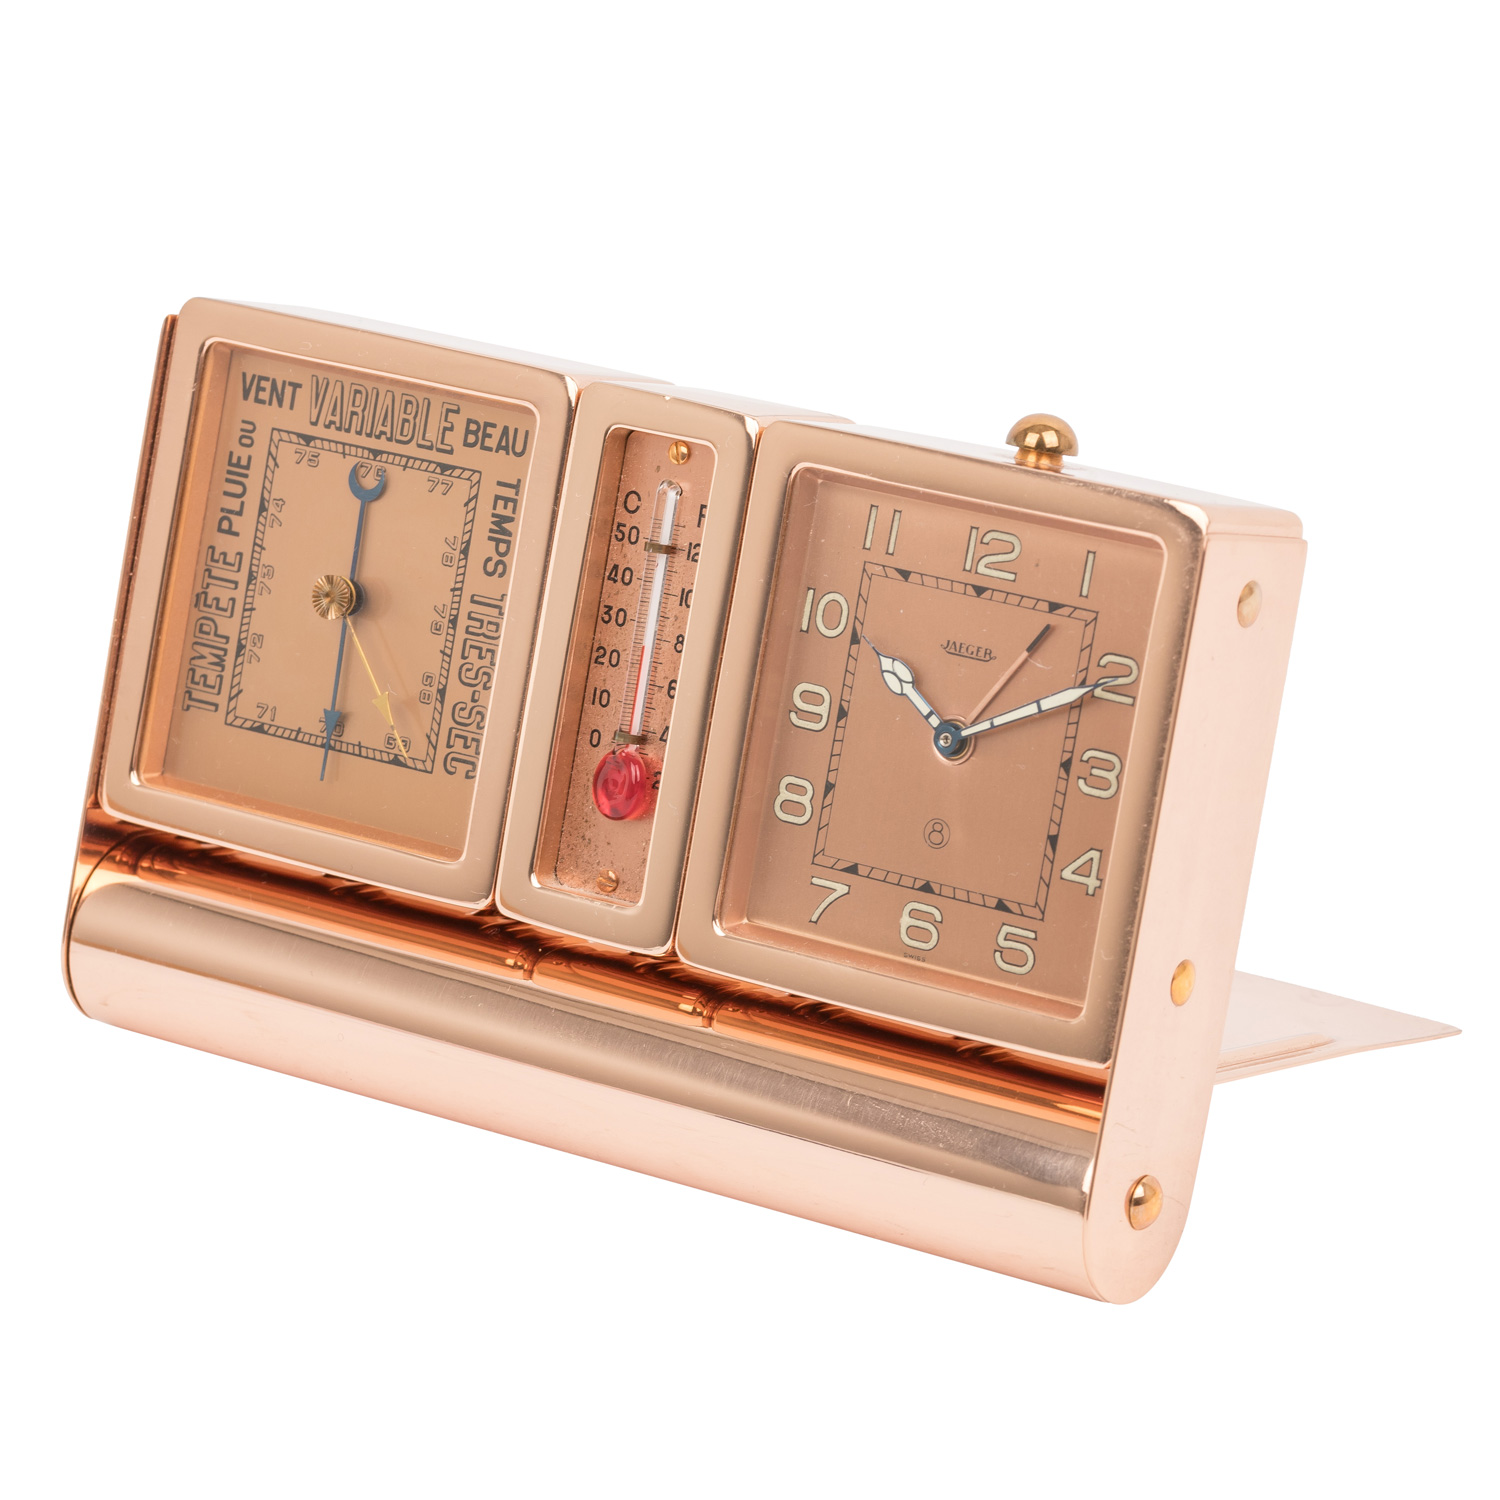 JAEGER-LECOULTRE, Reiseuhr mit Thermometer und Barometer, - Image 3 of 8